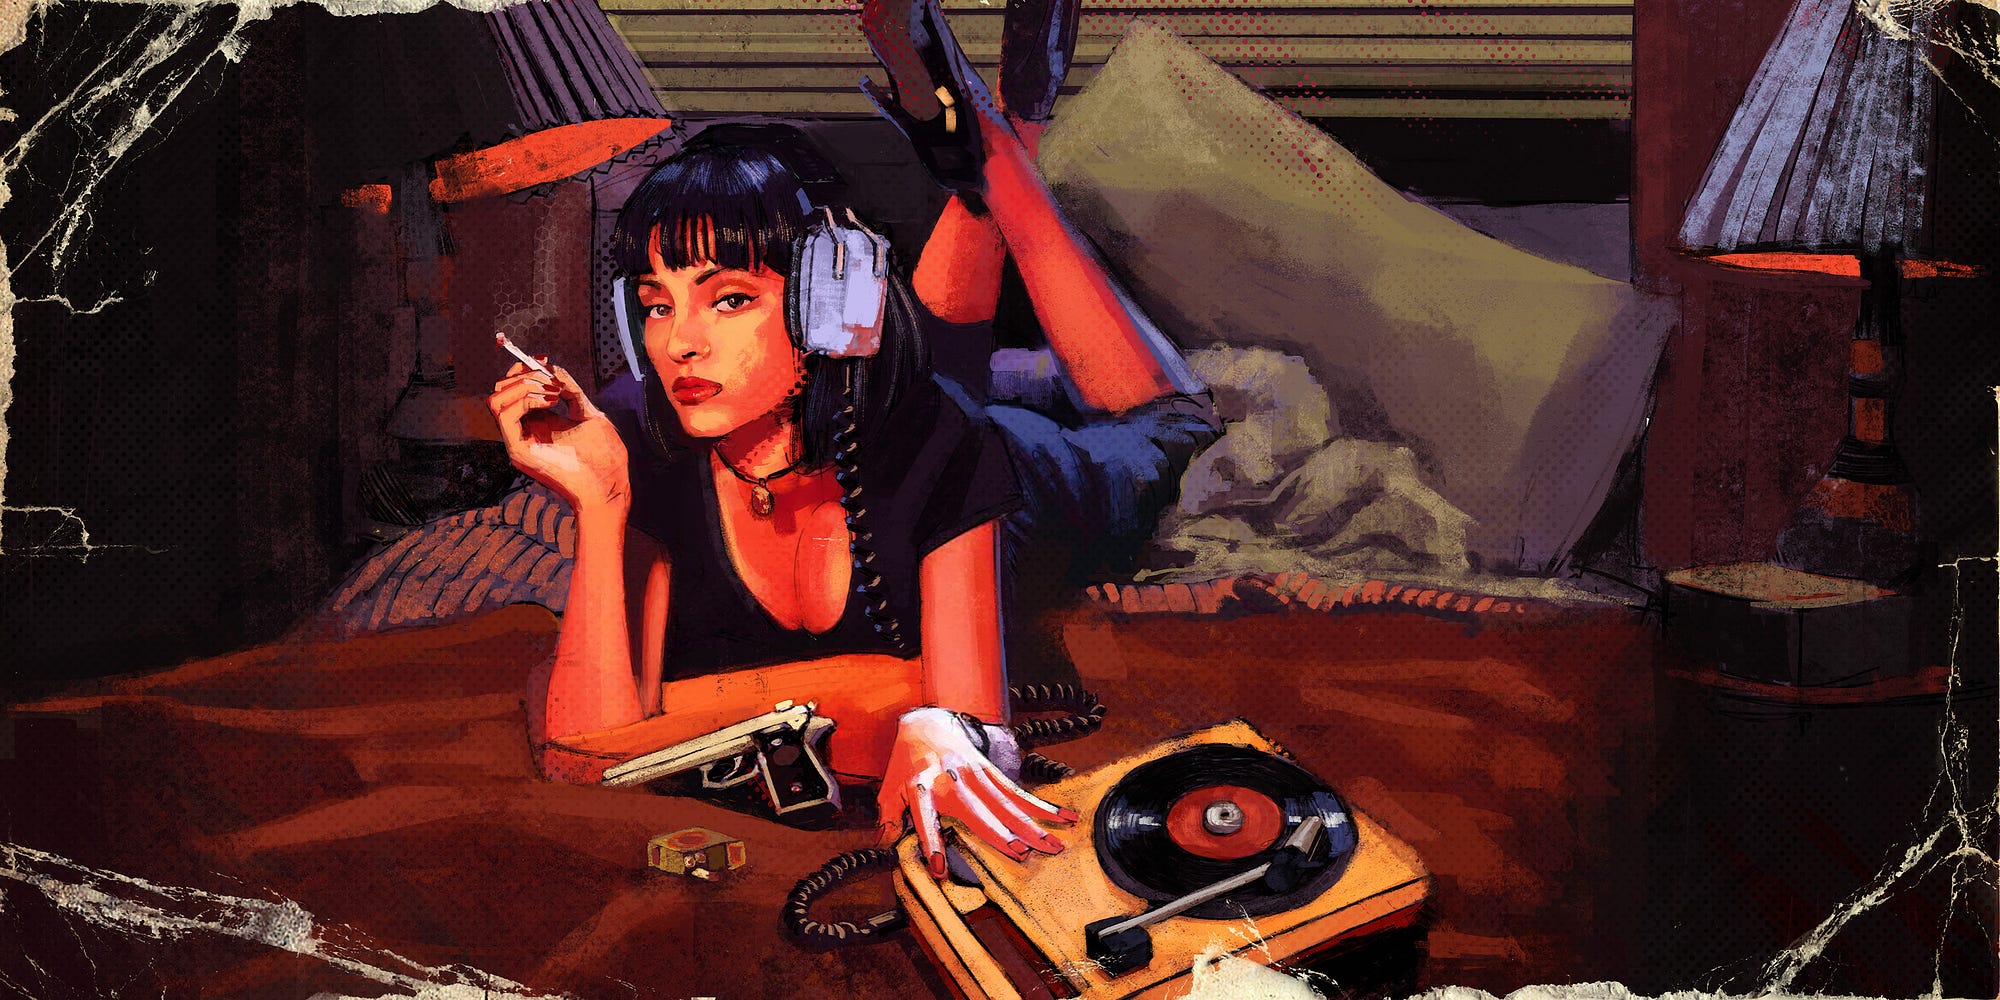 The Music Pulp Fiction